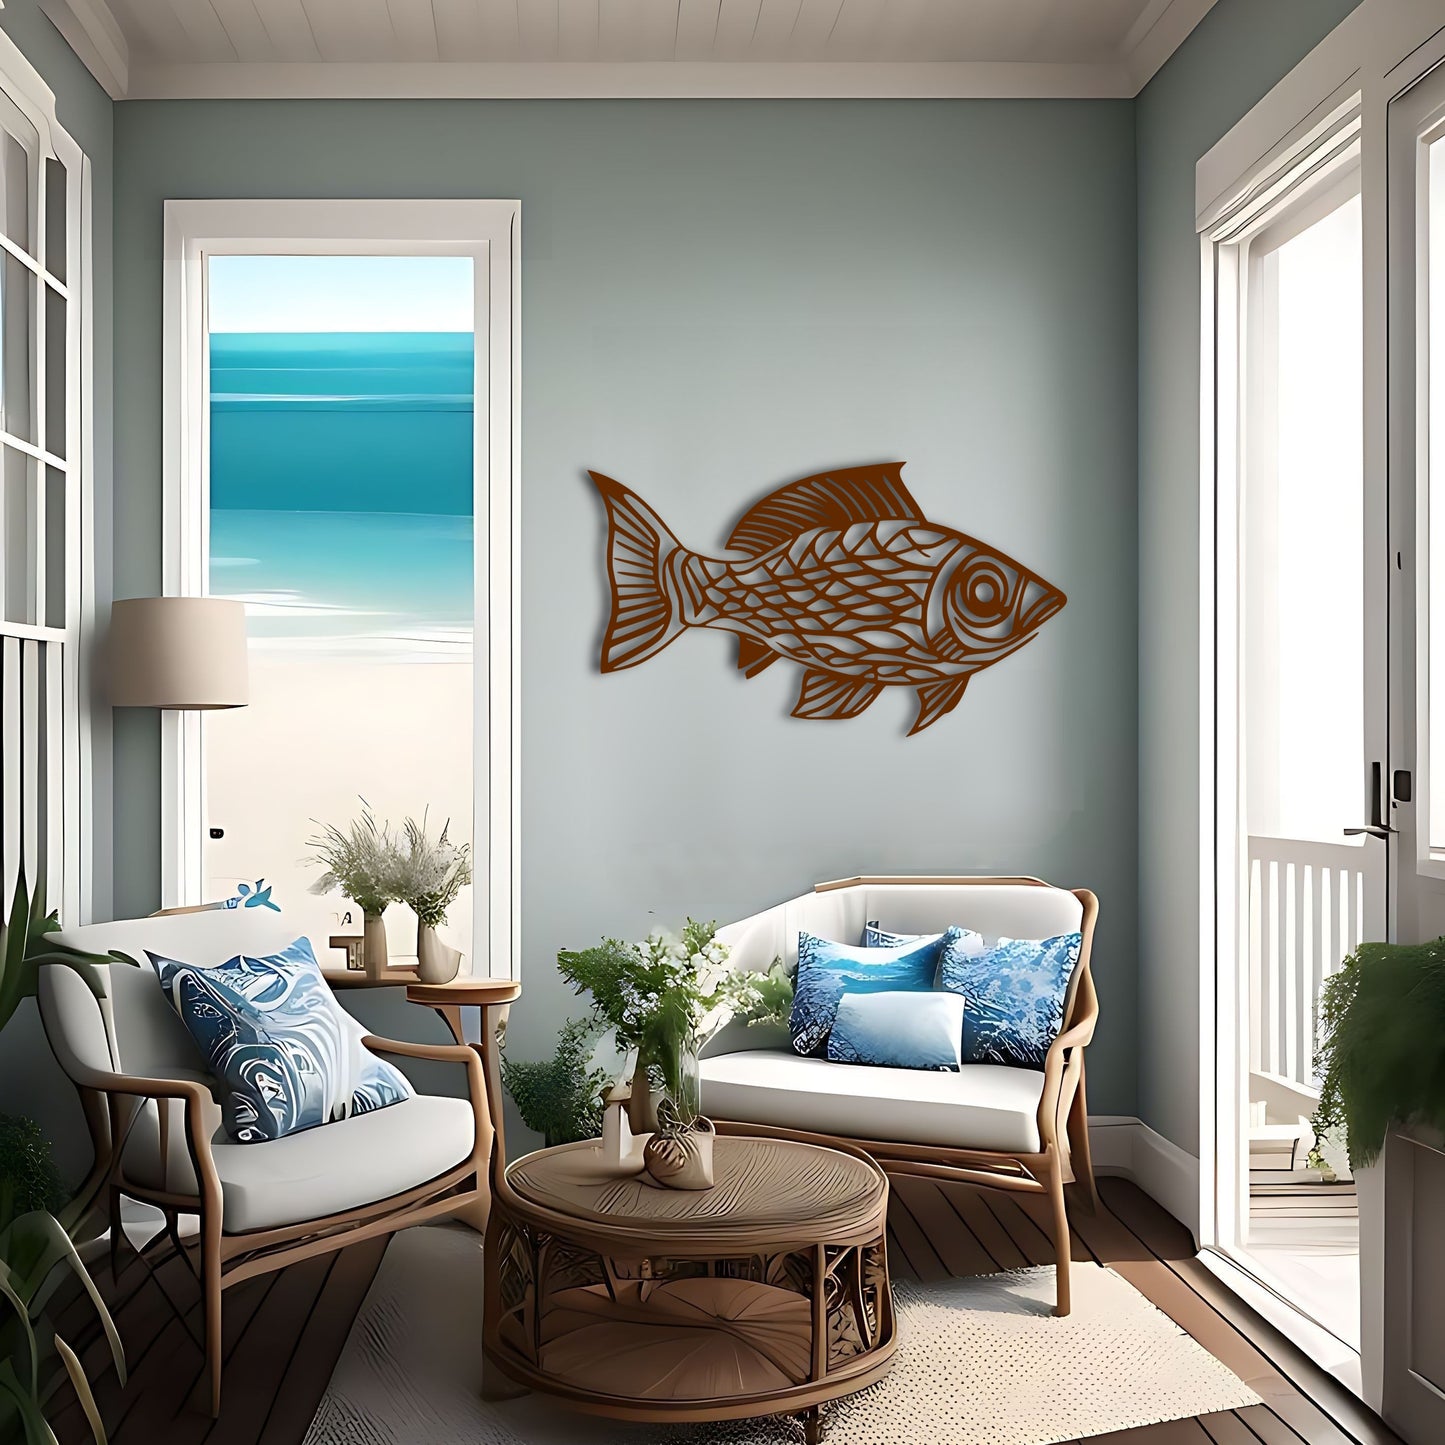 Fishop Art - Unique Metal Wall Art for Ocean Lovers and Fishing Enthusiasts